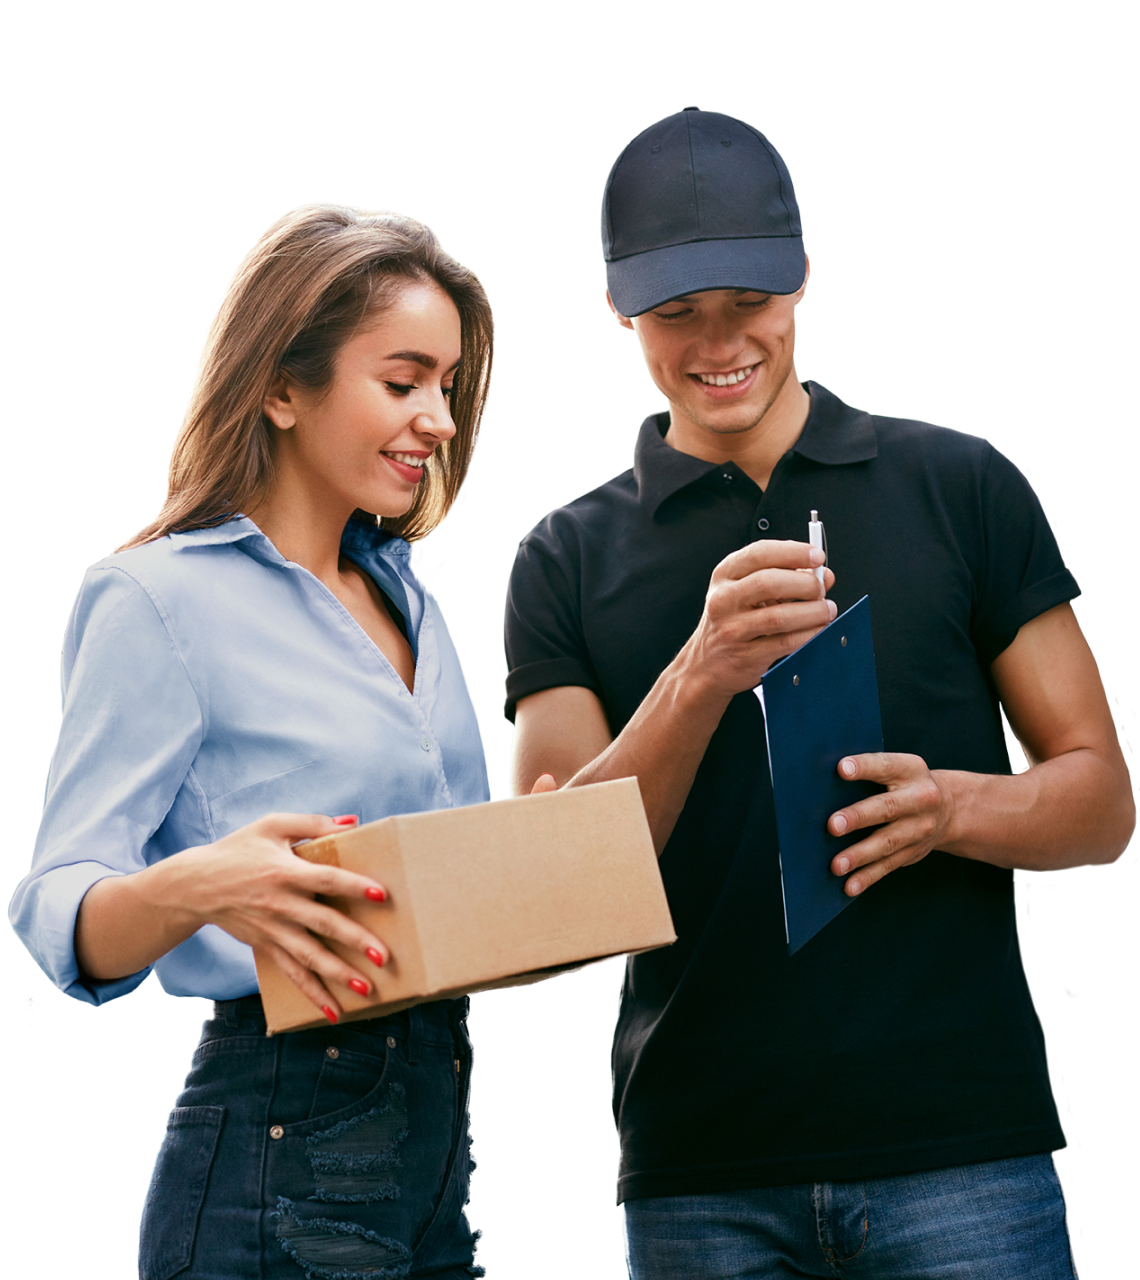 Delivery Courier service in Ukai - couriers and customers - borzo delivery